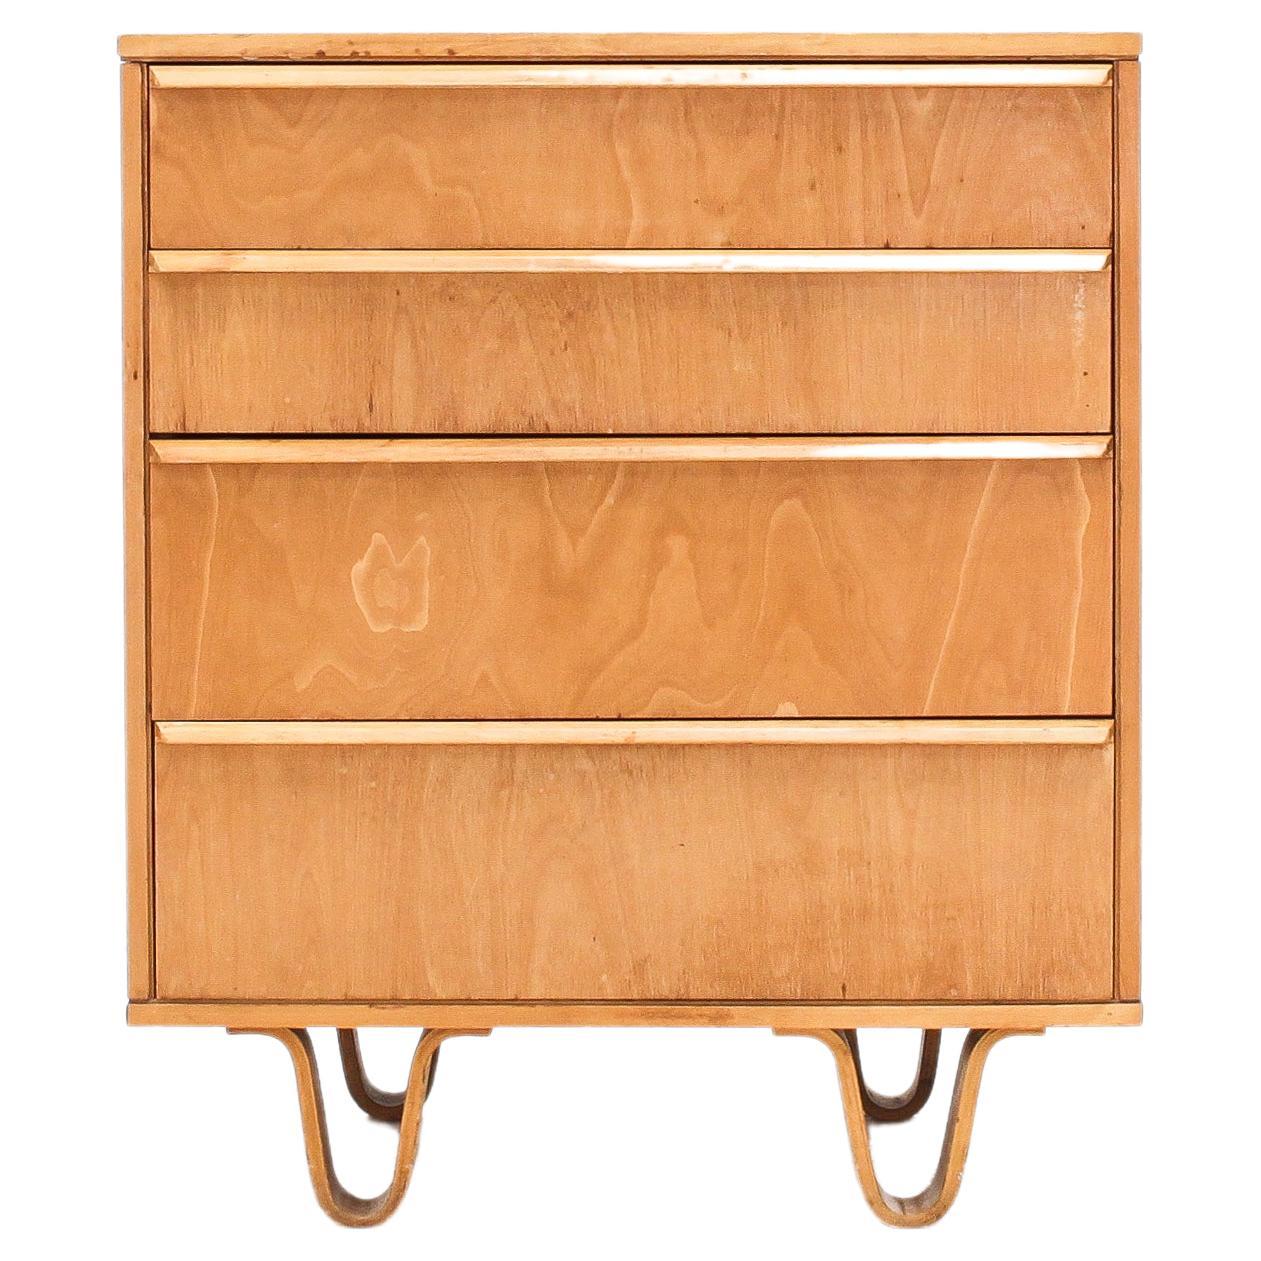 Cees Braakman CB05 Birch Chest of Drawers for UMS Pastoe, 1952, Netherlands